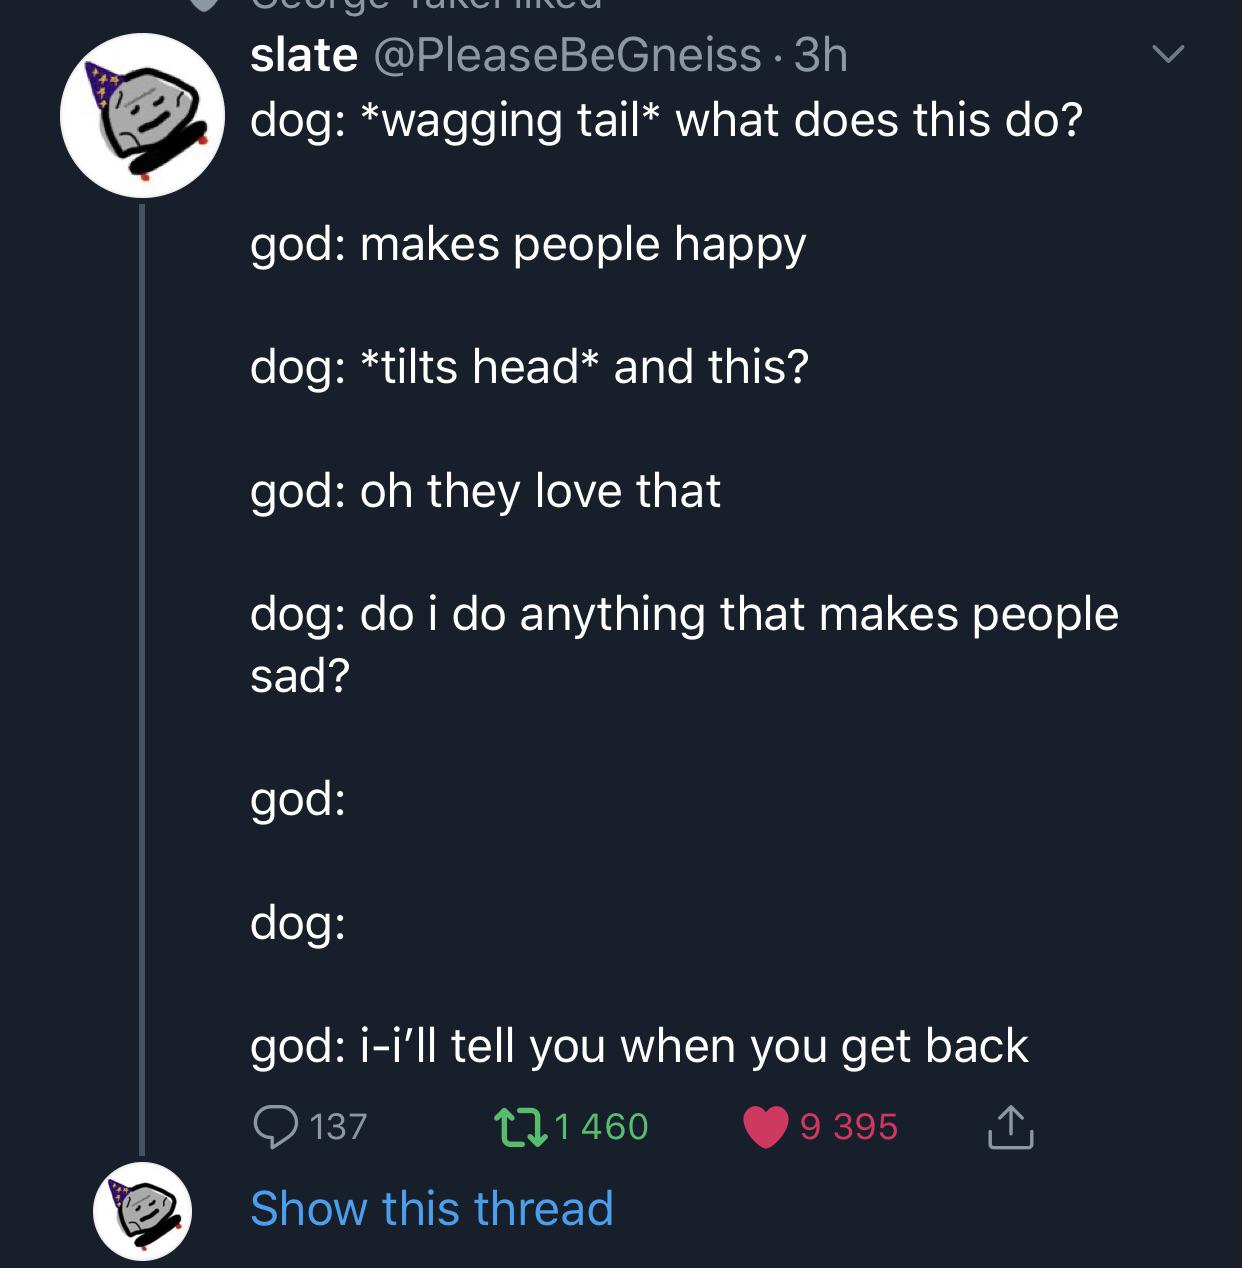 All dogs go back to heaven.